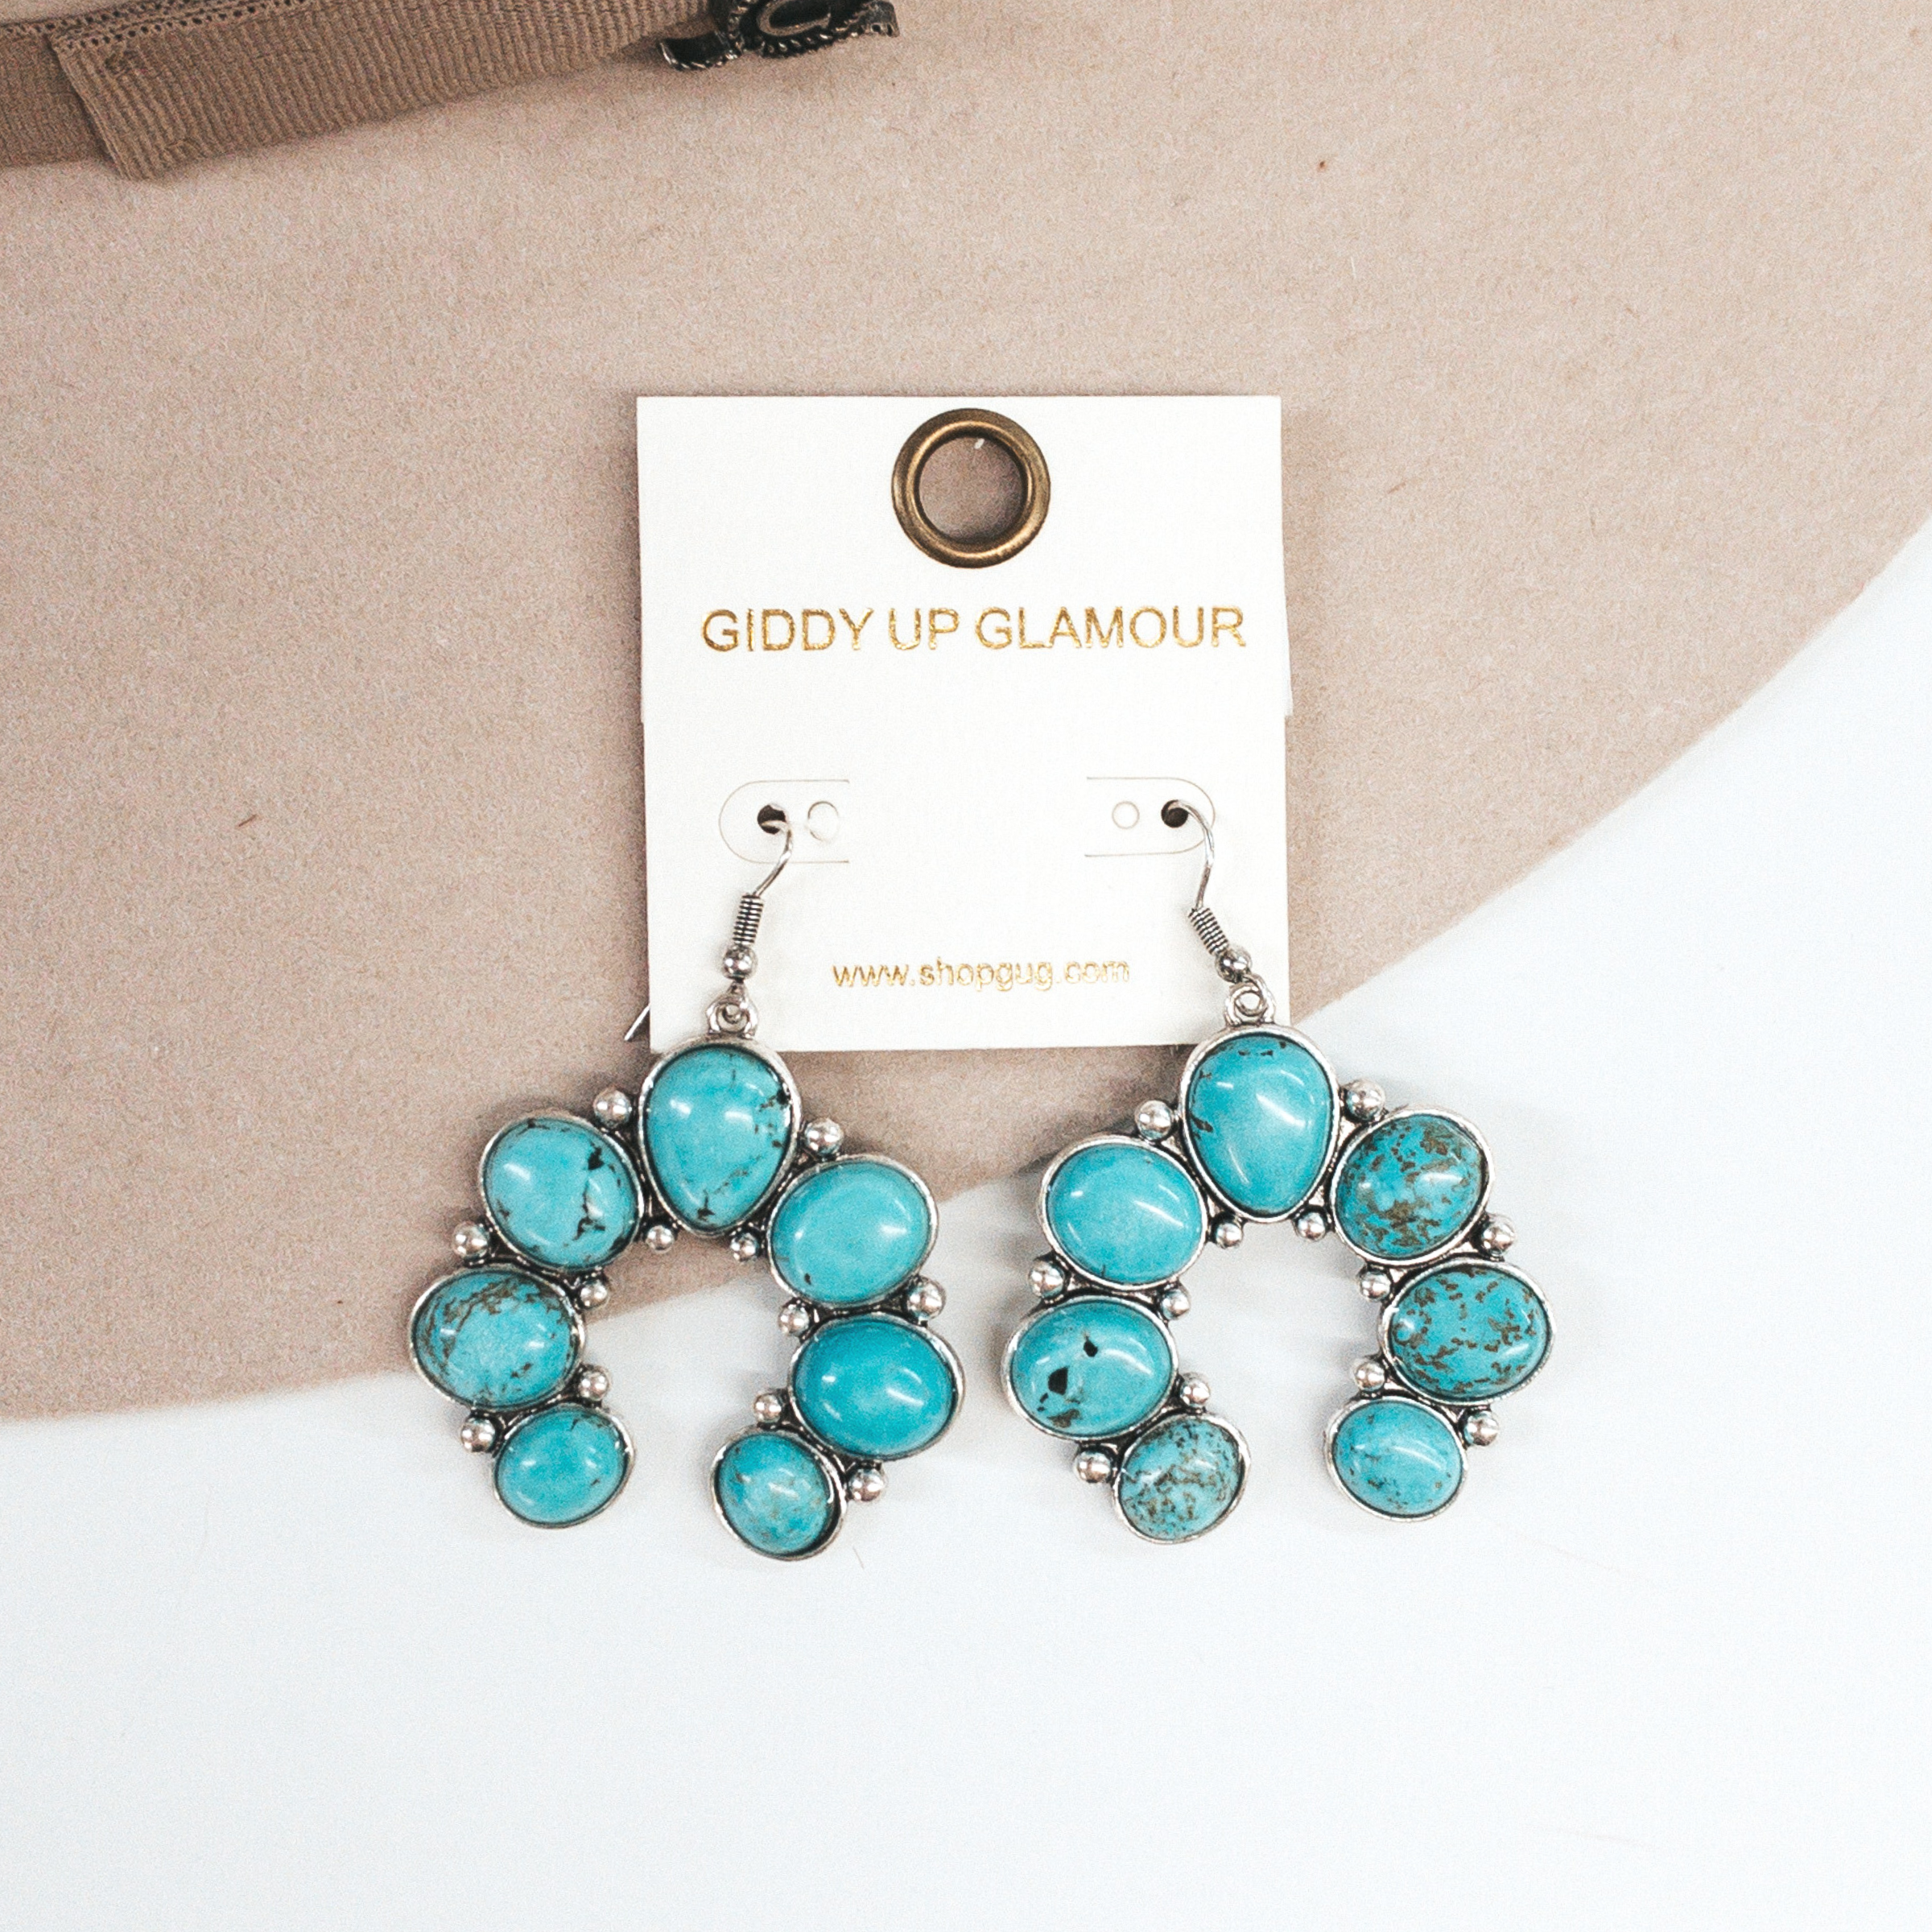 Turquoise stone squash blossom dangle earrings with a silver backing. Pictured on a a white and beige background. 